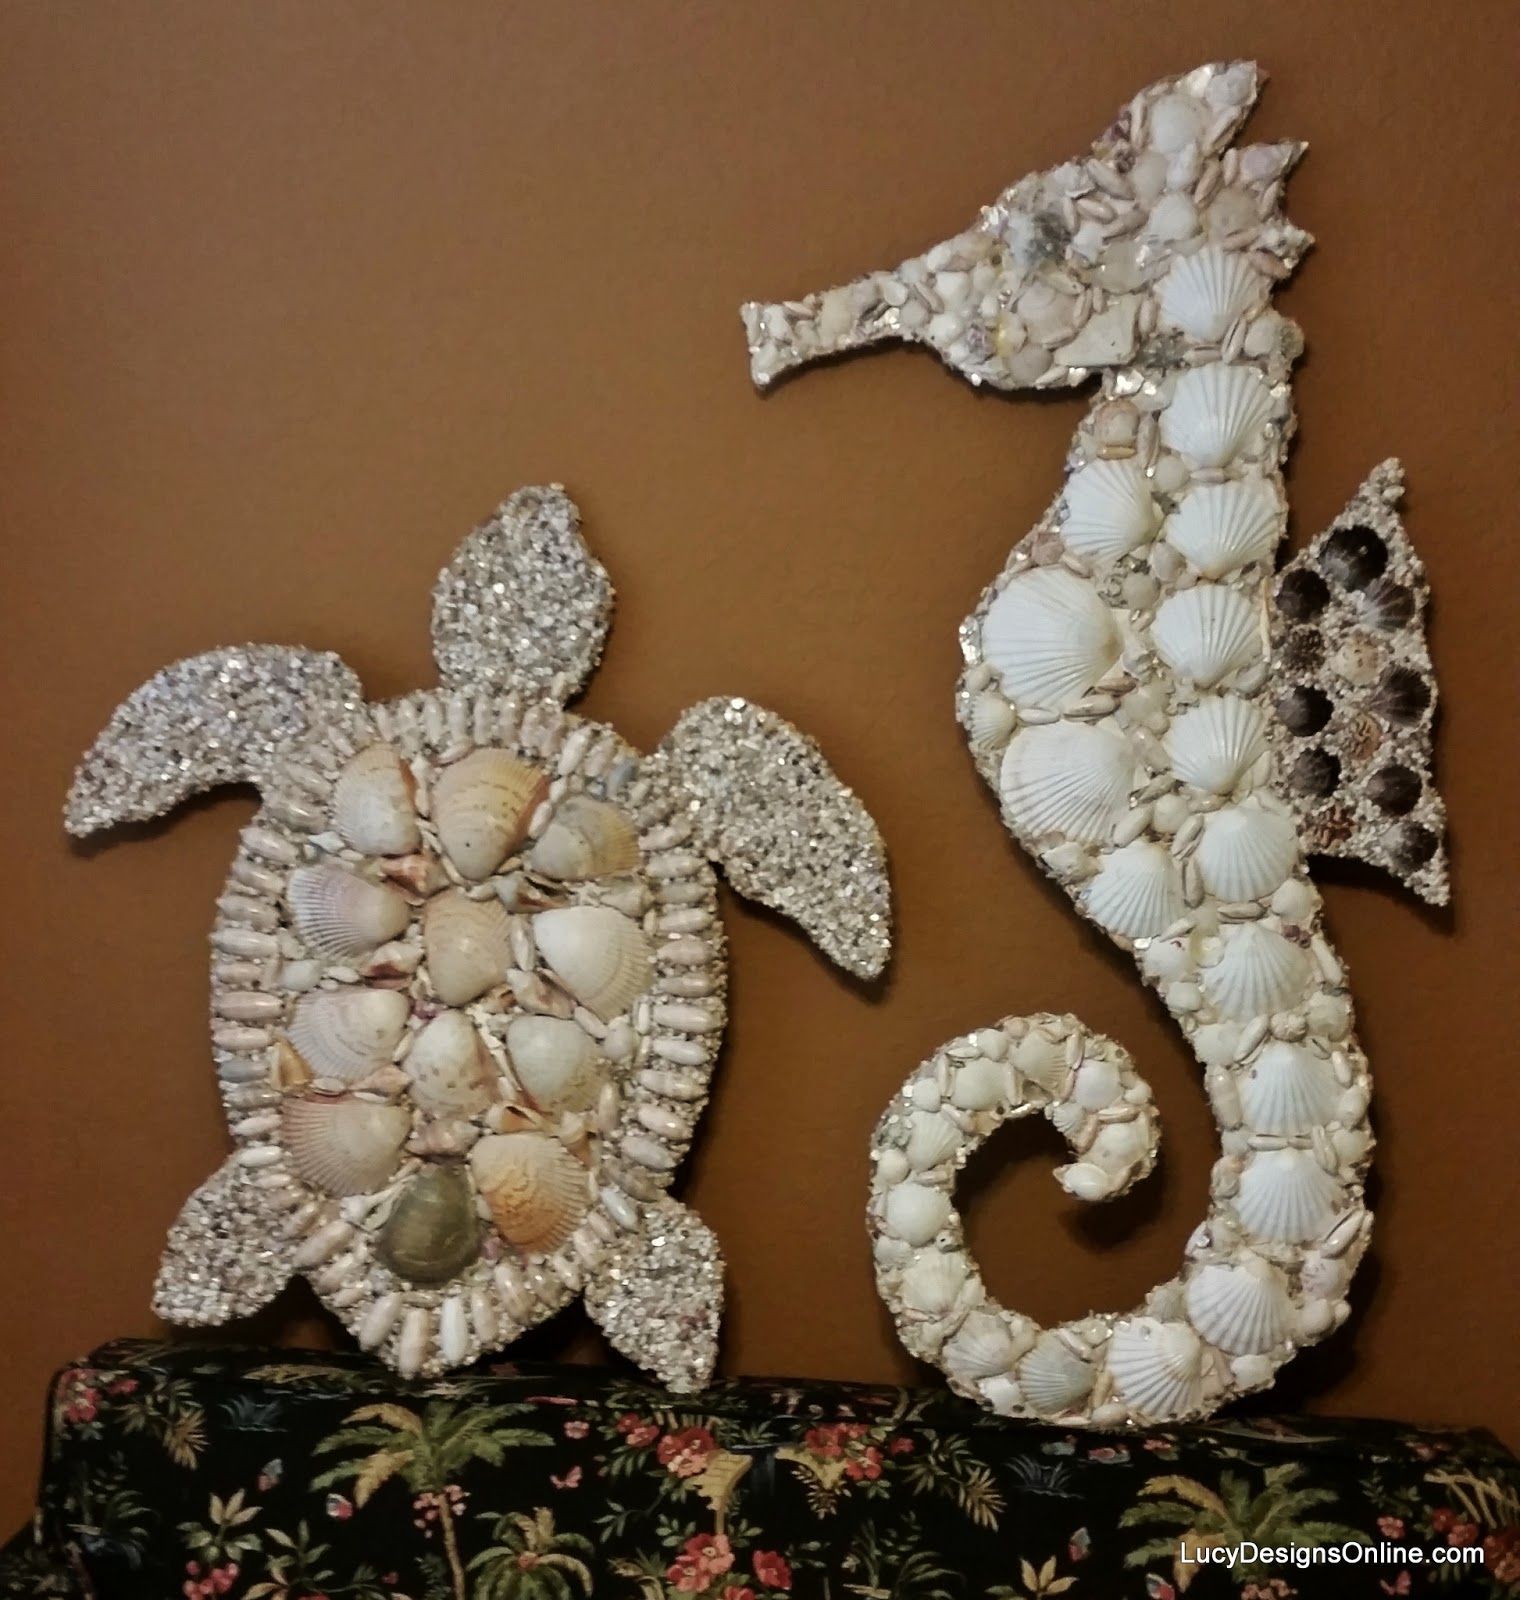 Stained Glass and Seashell Mosaic Sea Creatures – Octopus, Seahorse and Sea Turtles #shell mosaic